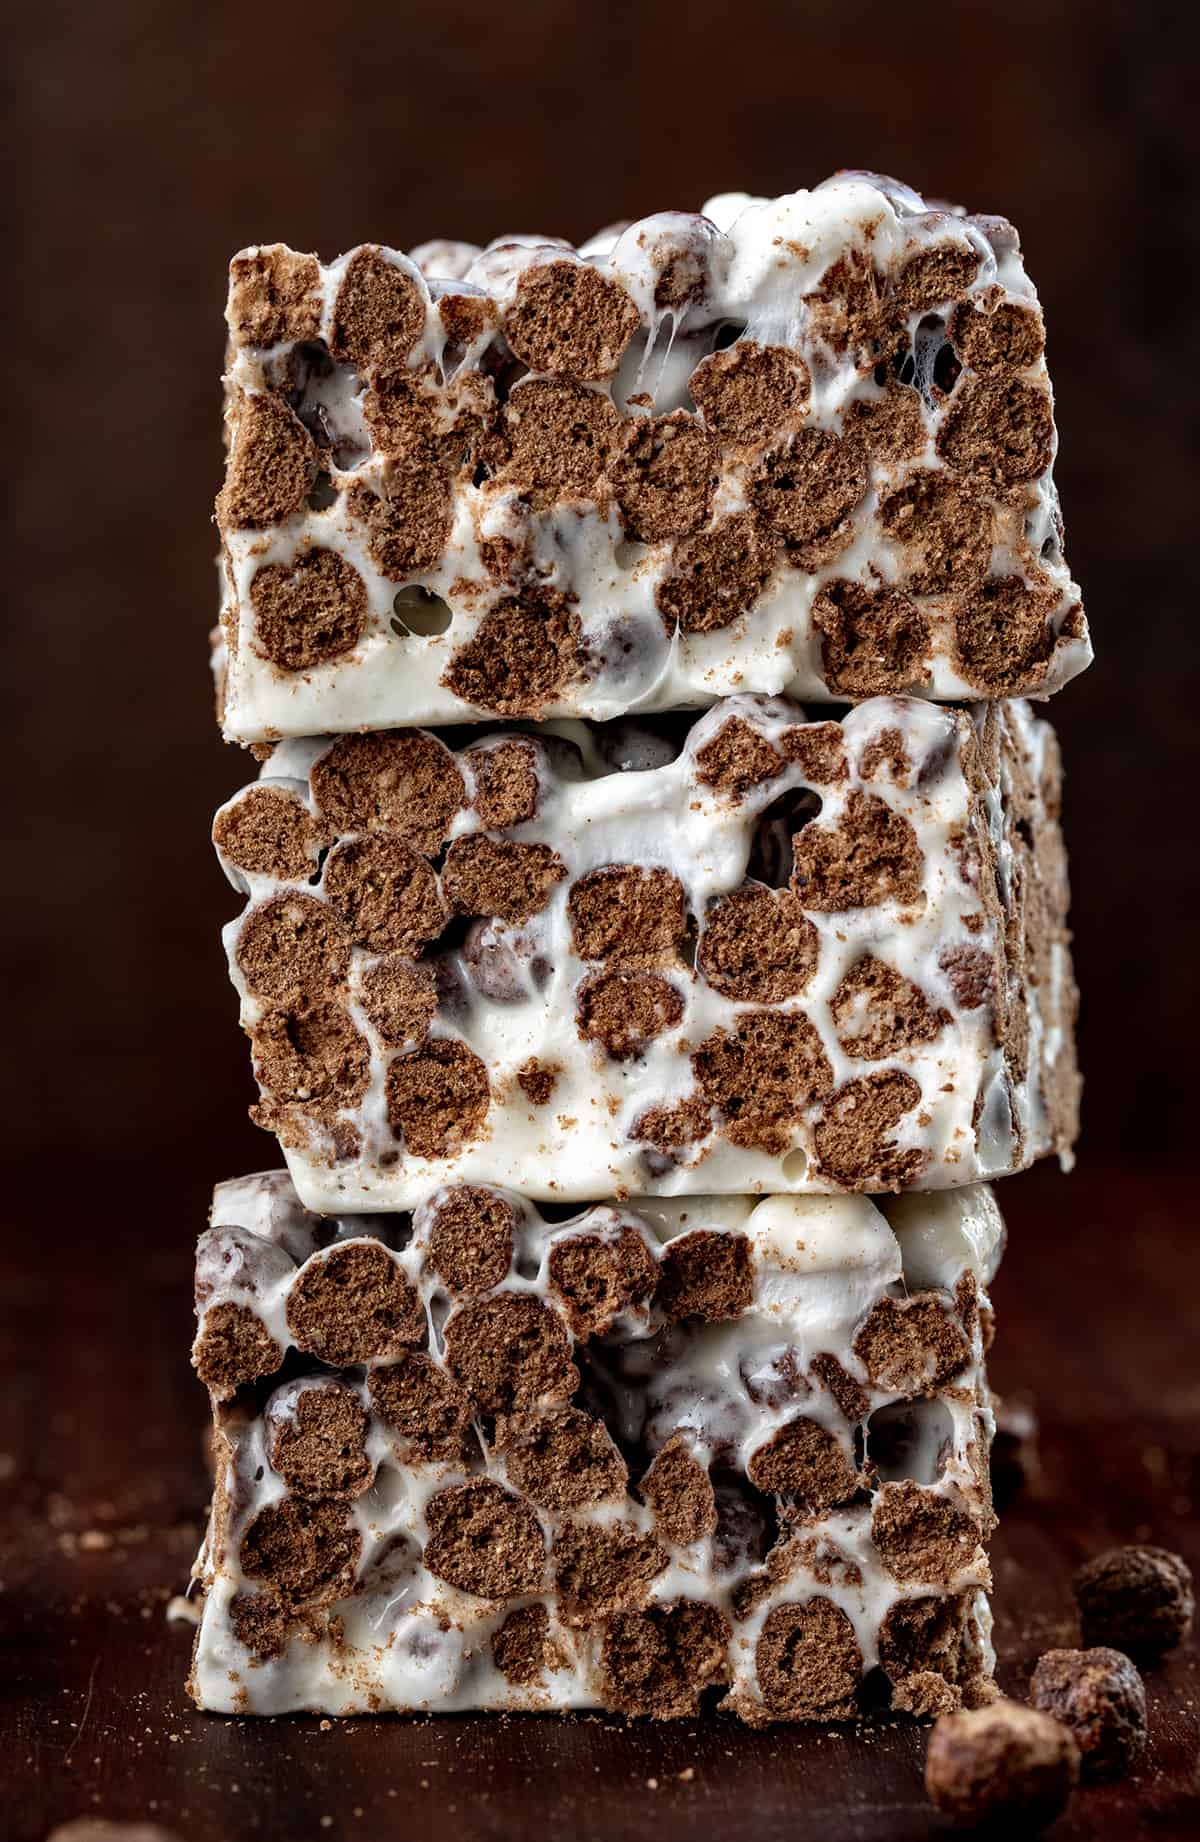 A stack of Cocoa Puff Bars That Have Been Cut Showing Inside Texture.